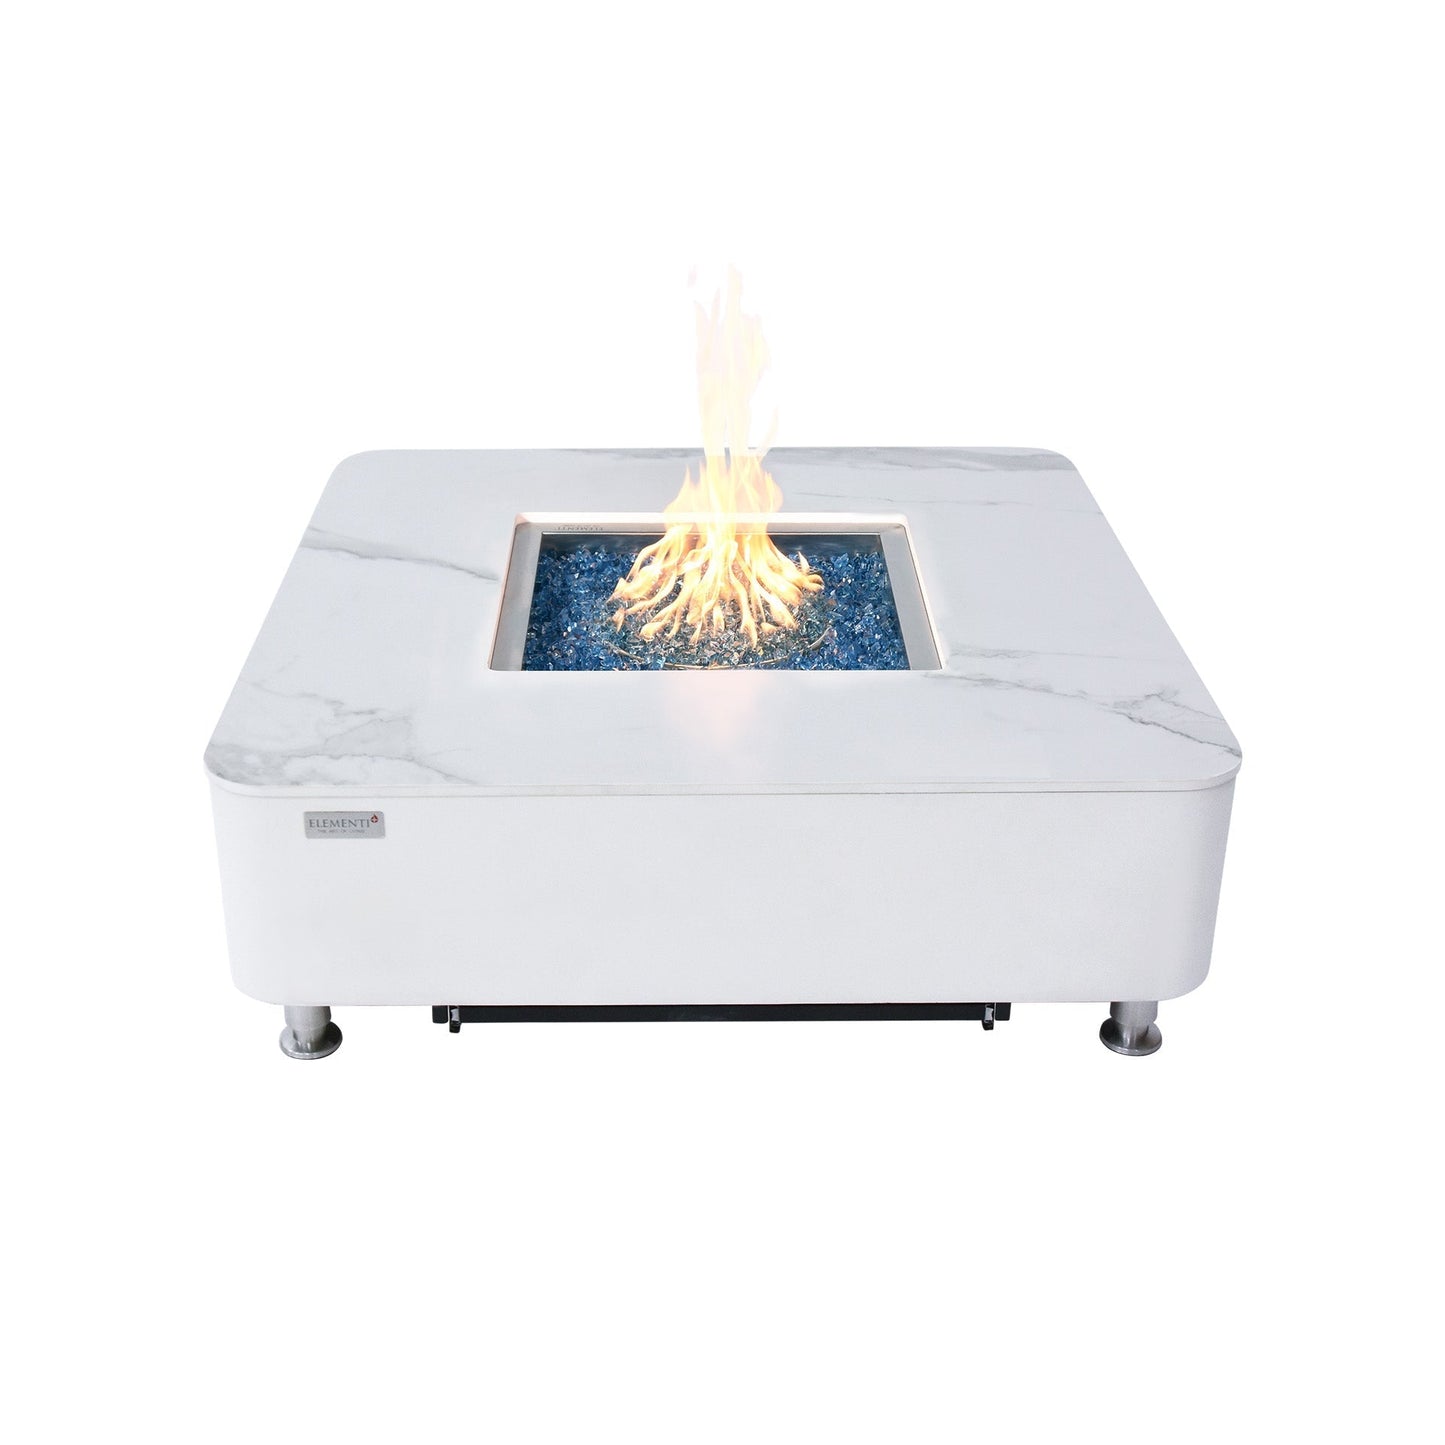 Elementi Plus Annecy 42" Bianco White Natural Gas Marble Porcelain Fire Table